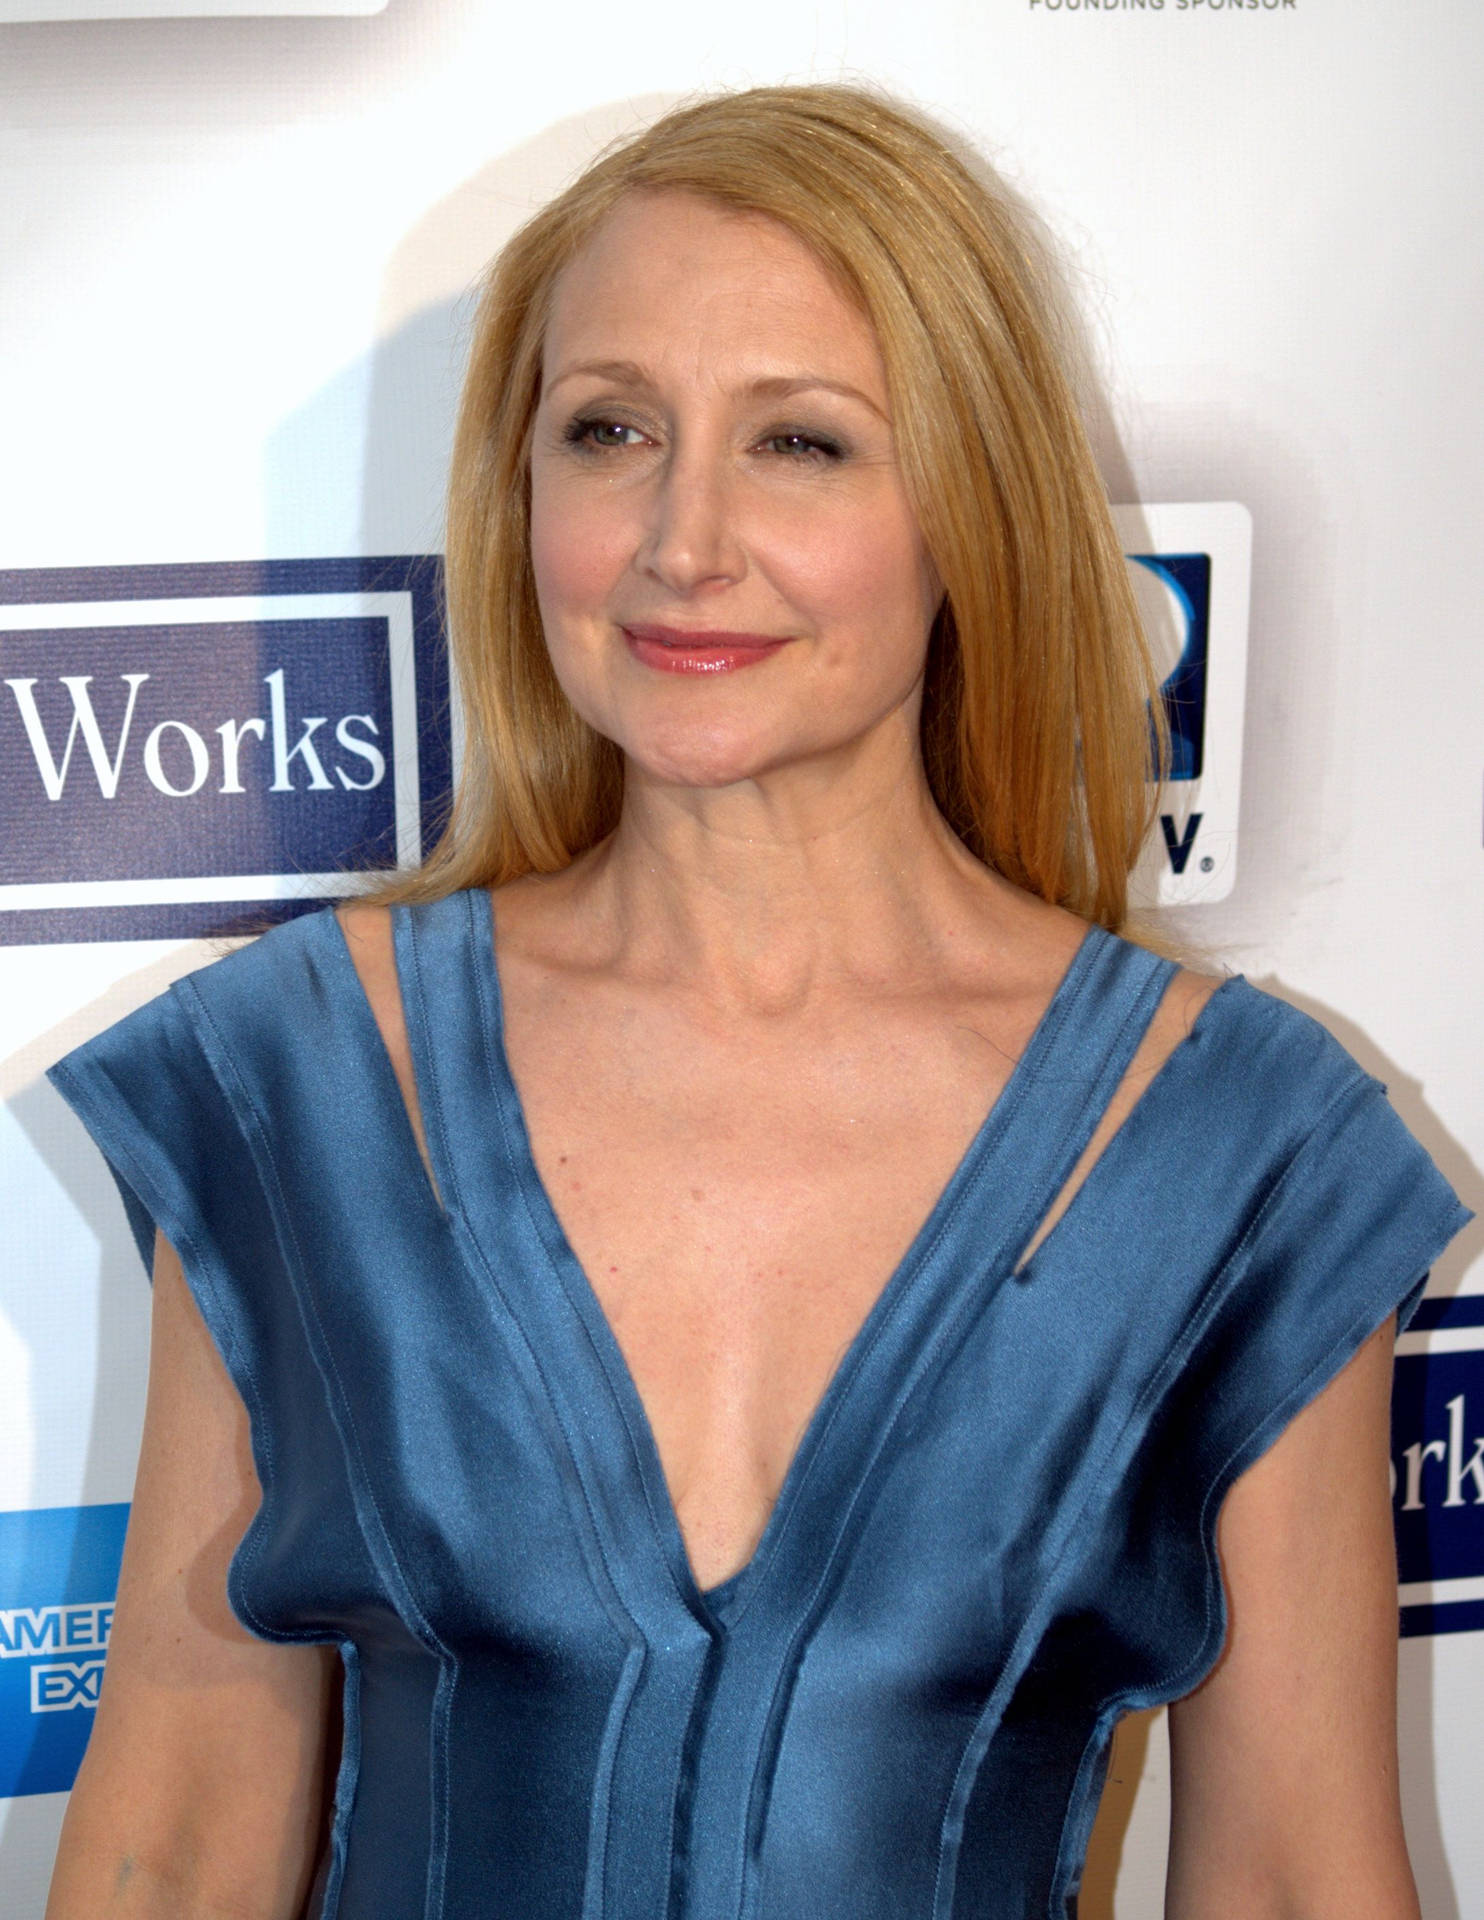 Patricia Clarkson In "Whatever Works" Wallpaper